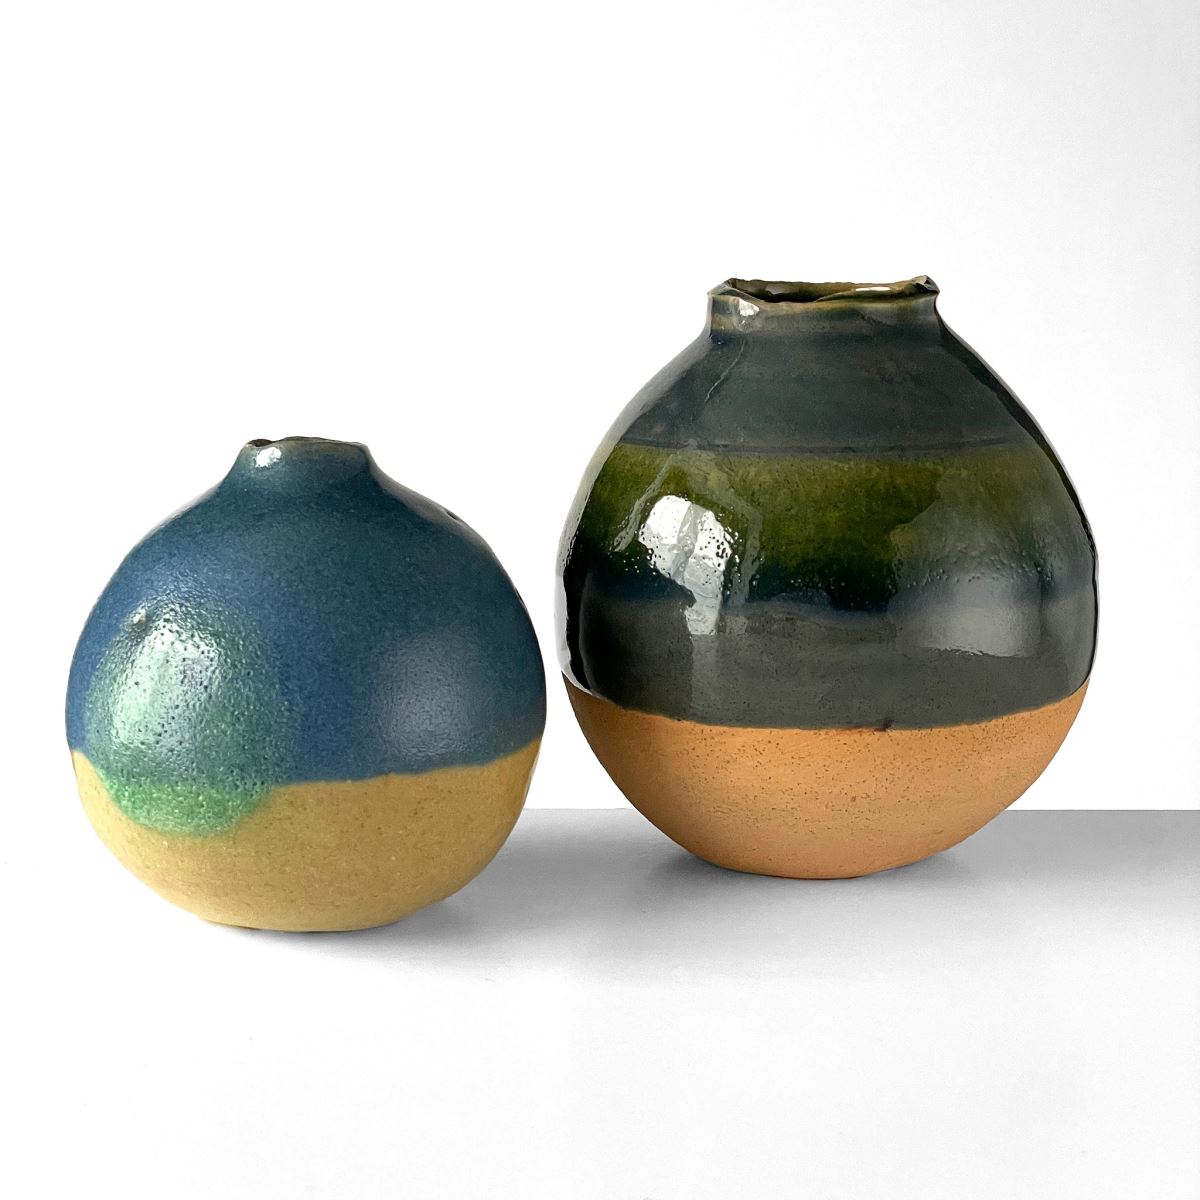 Two ceramics pots from blackShed Gallery